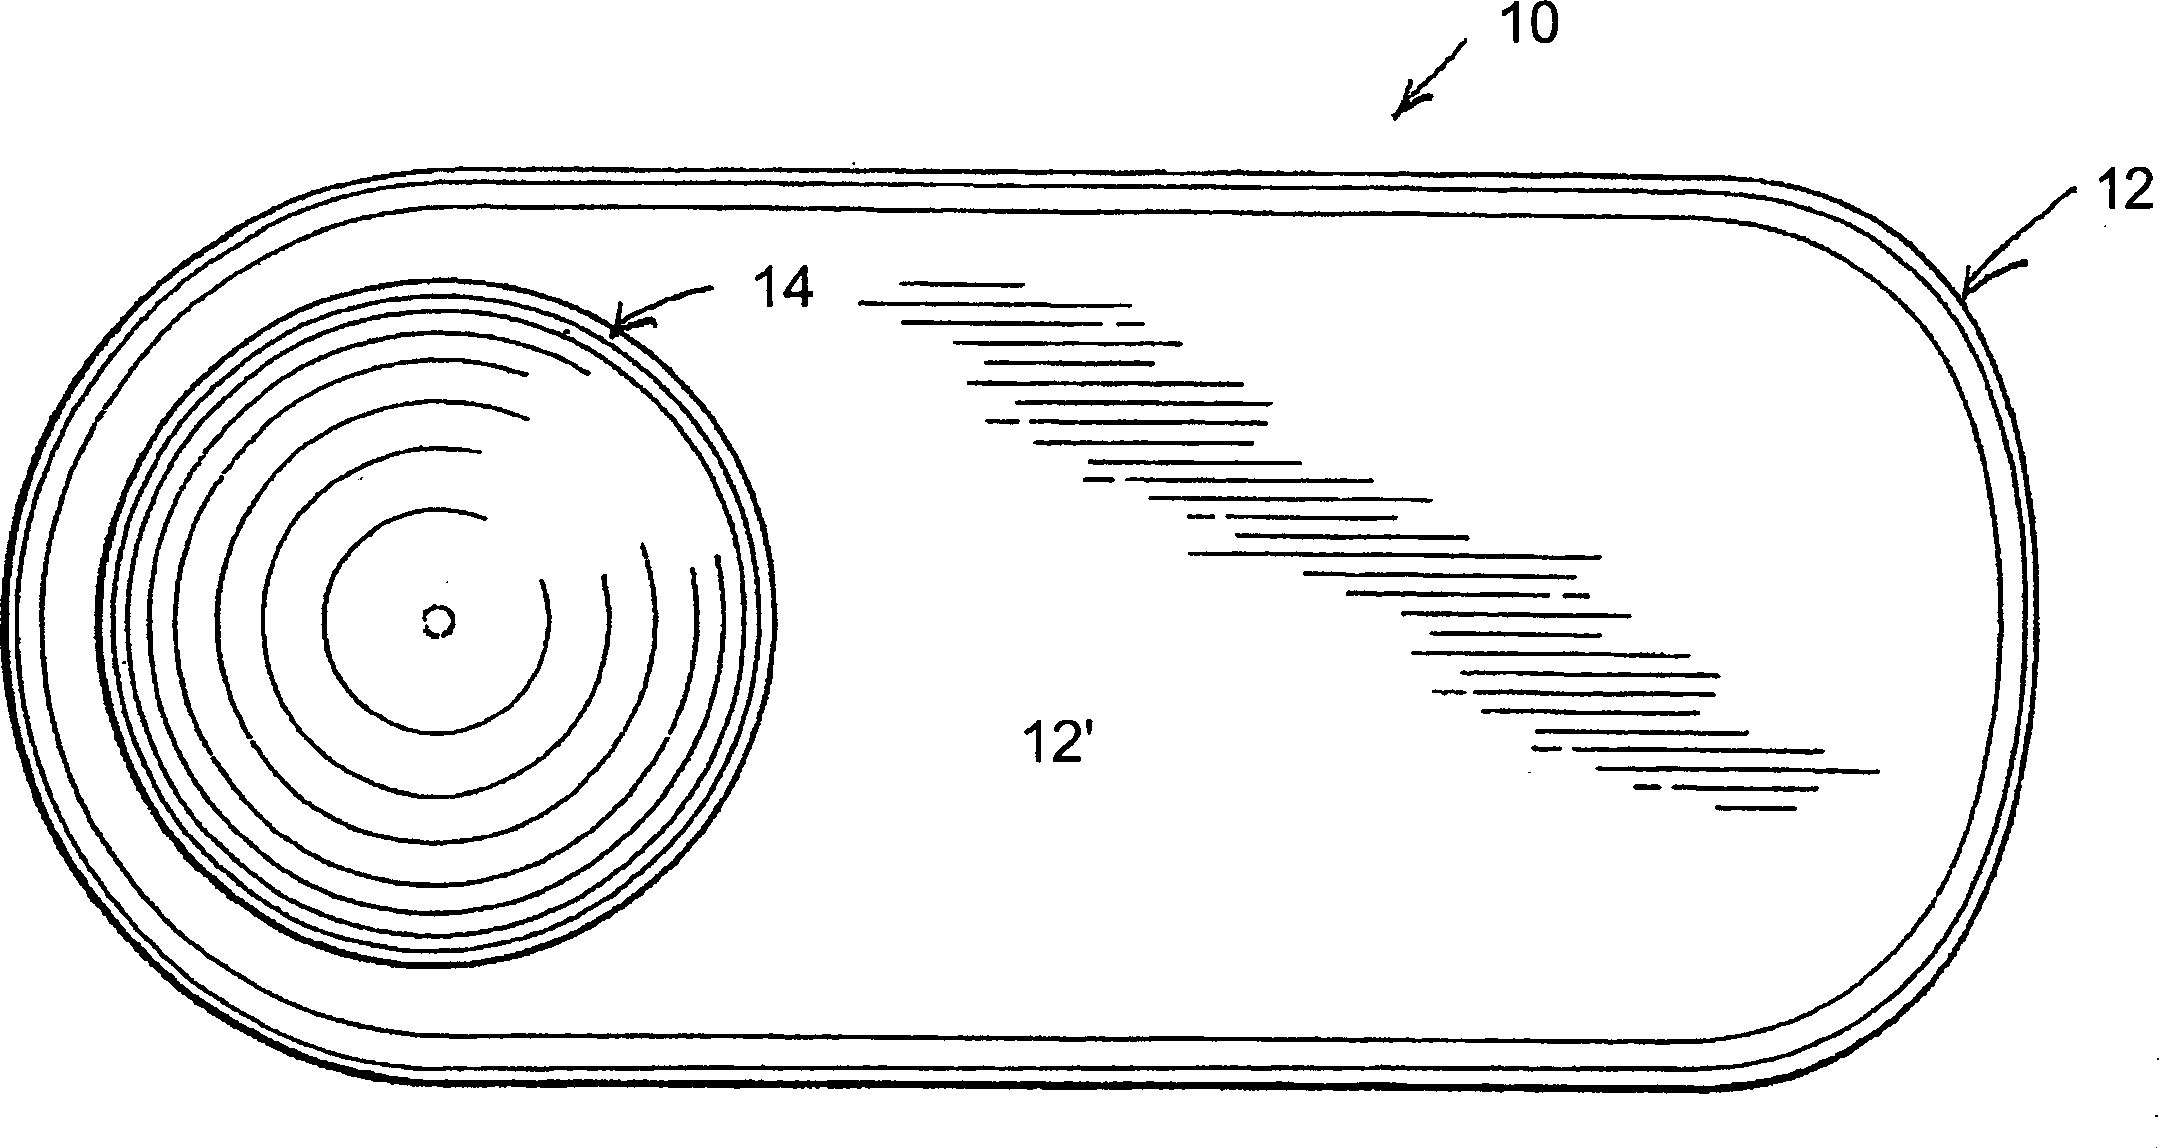 Security device for preventing unauthorized removal of merchandise